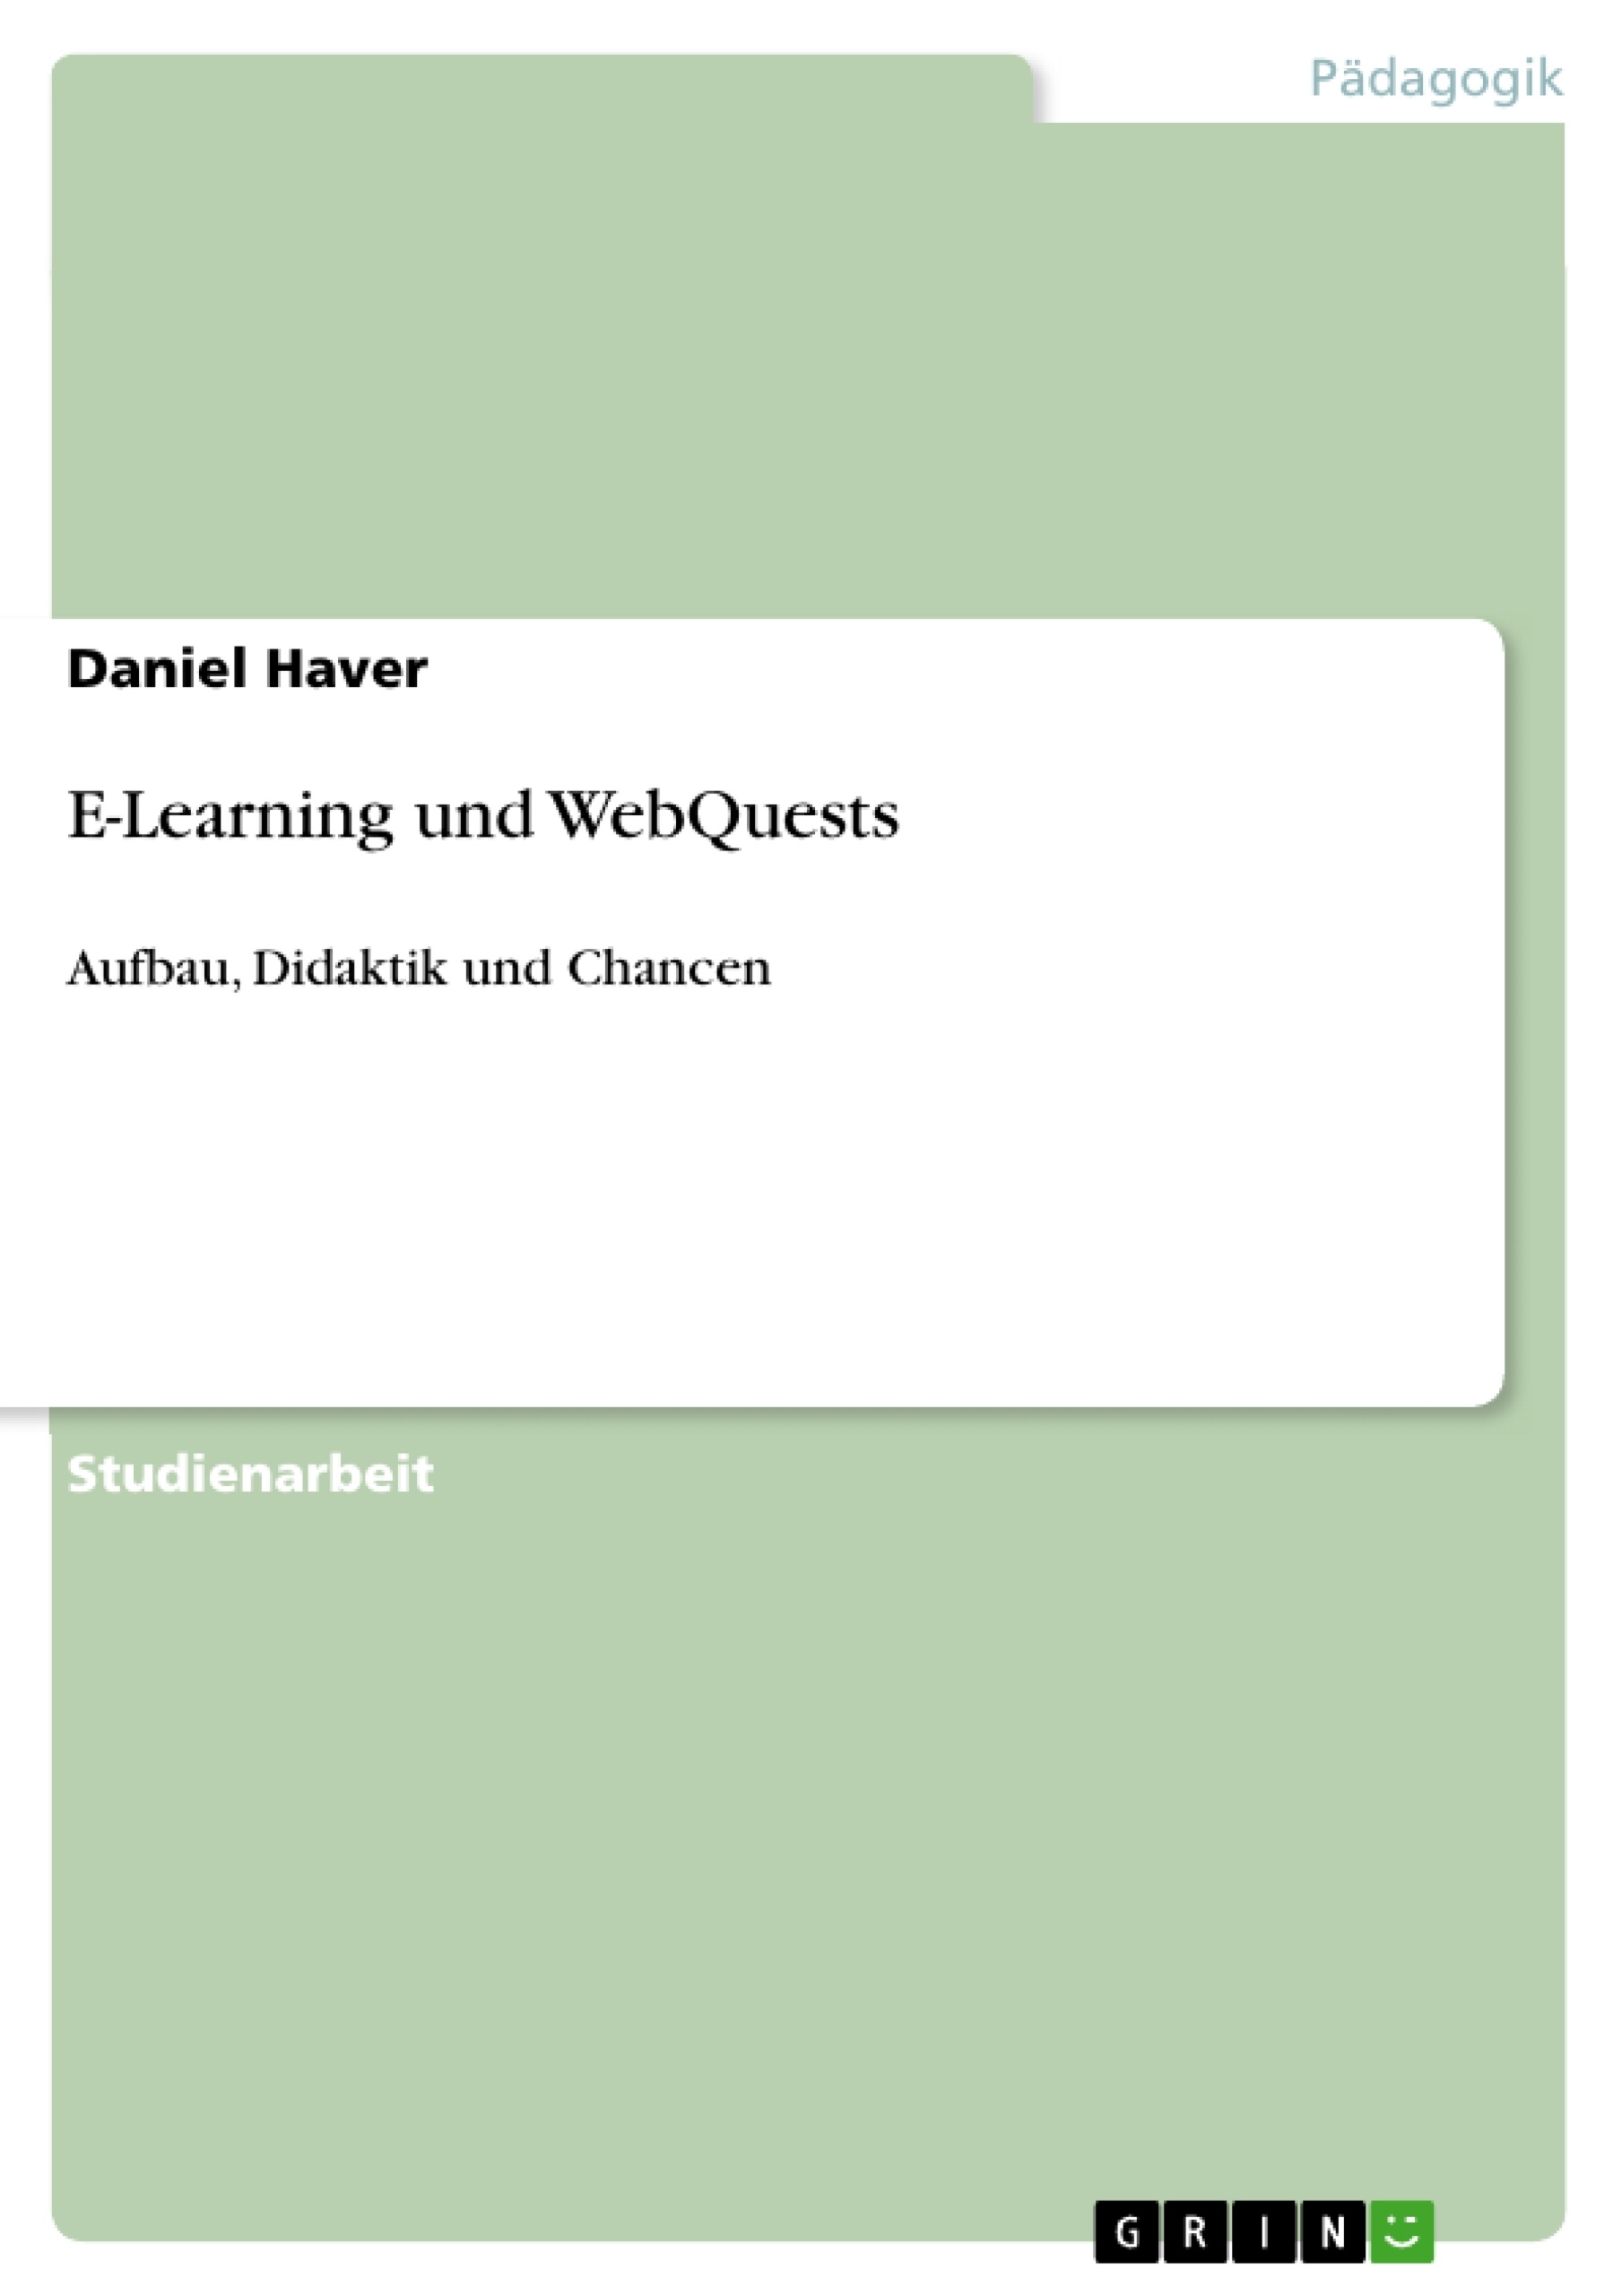 Título: E-Learning und WebQuests 